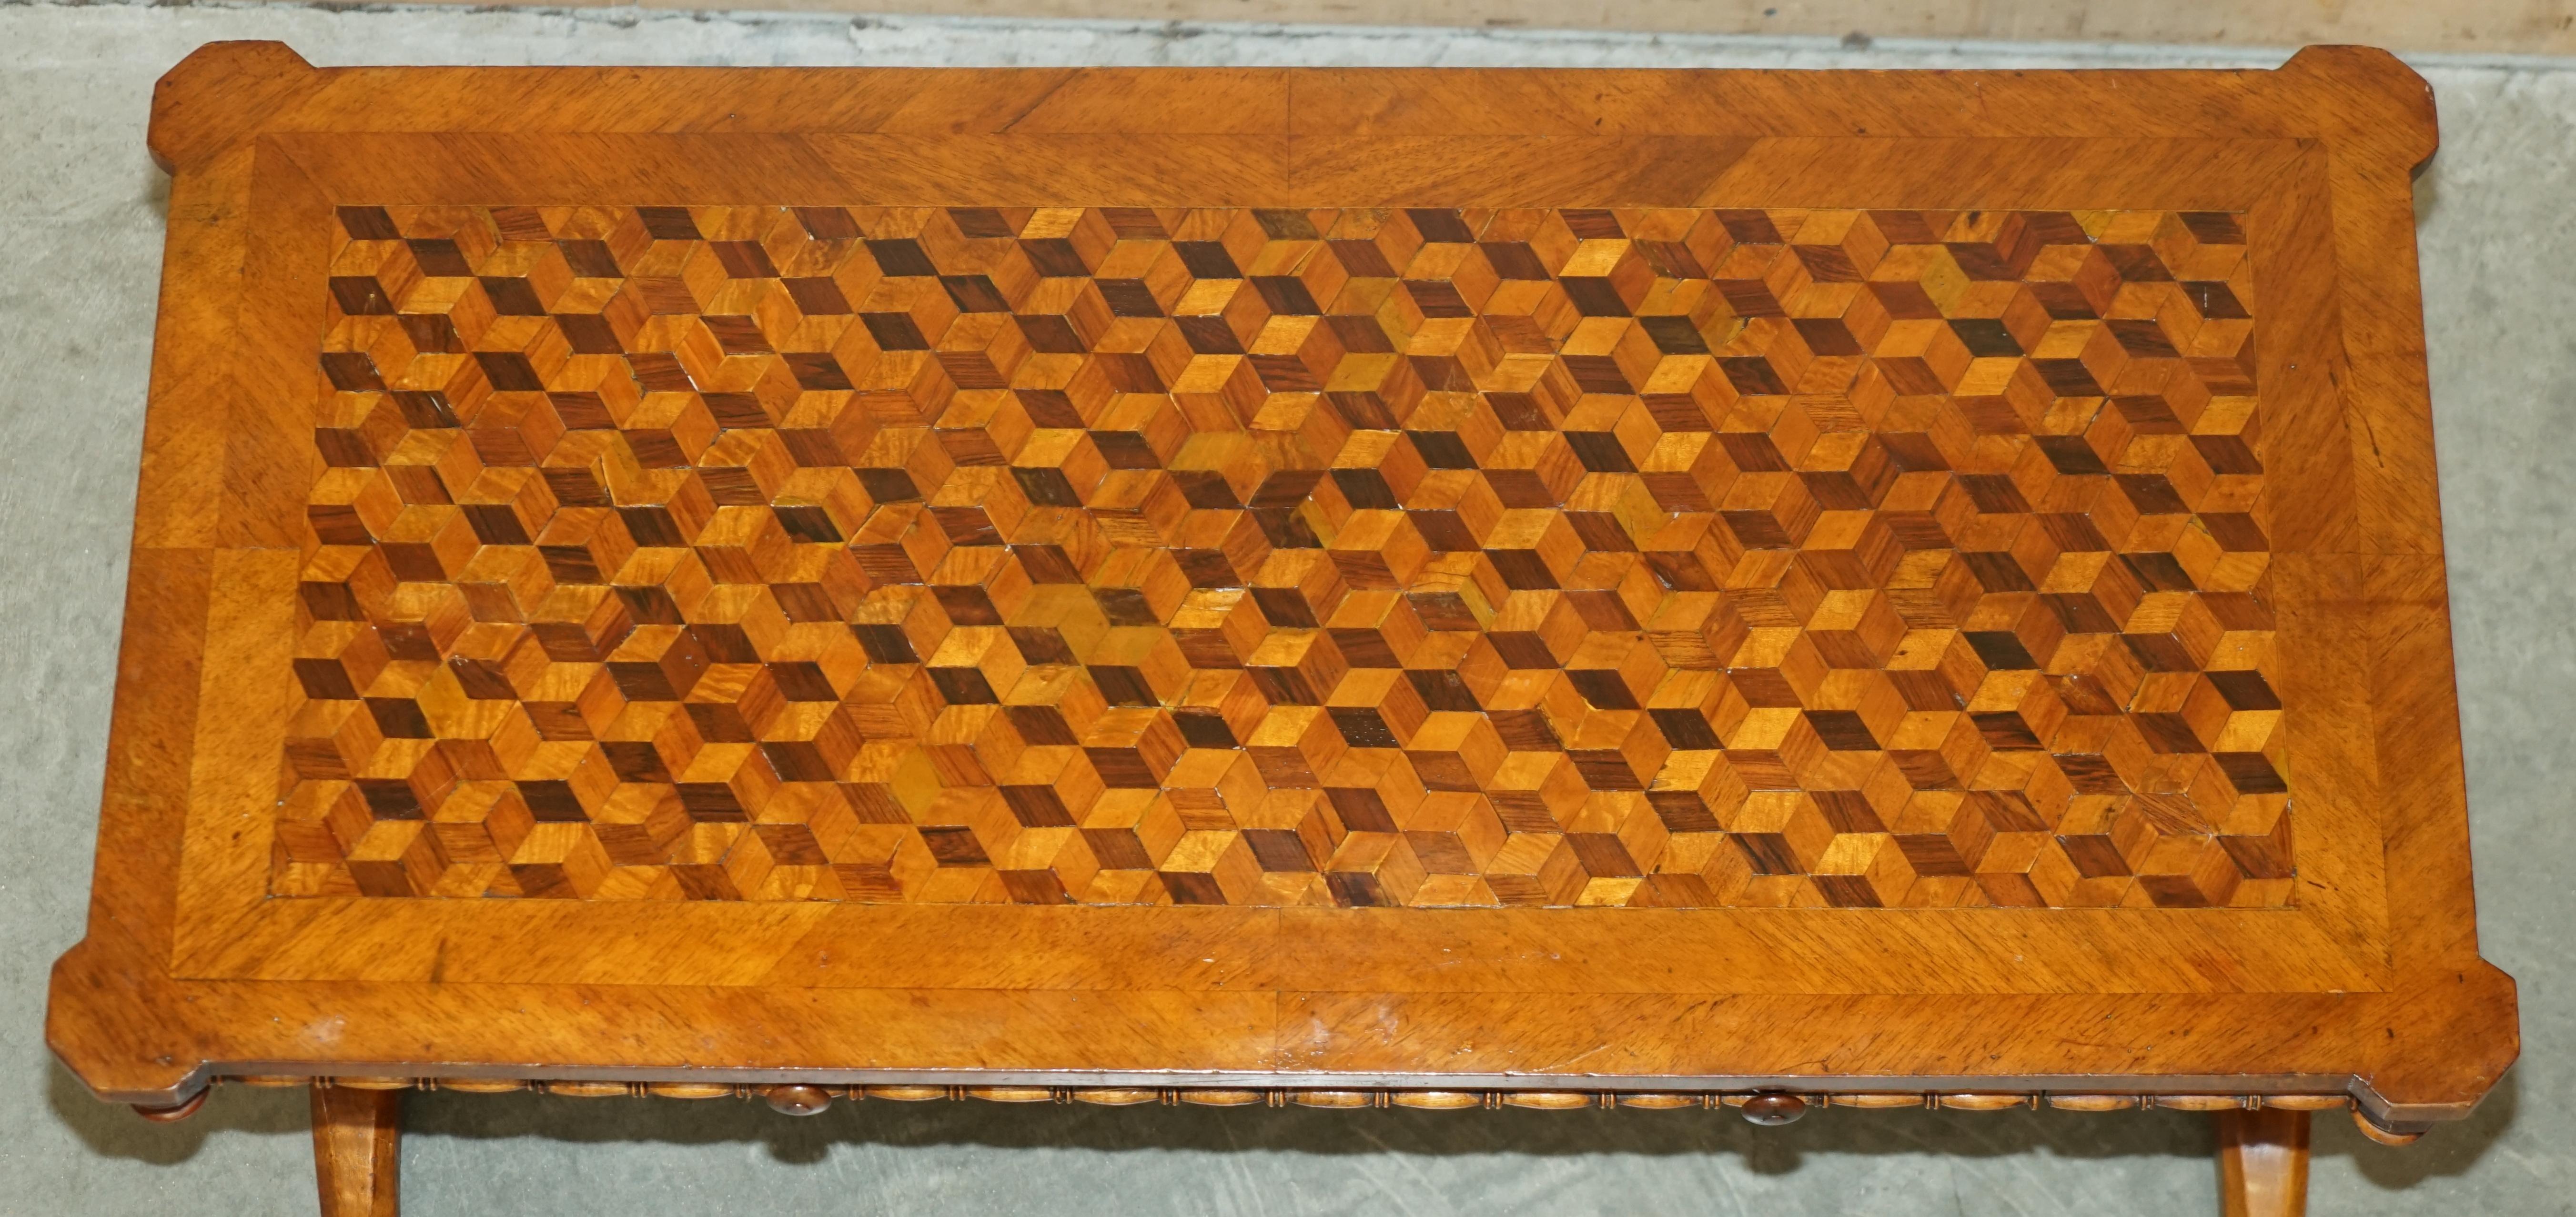 SUBLIME ANTiQUE 19TH CENTURY SPECIMEN GEOMETRIC SAMPLE WOOD INLAID COFFEE TABLE For Sale 5